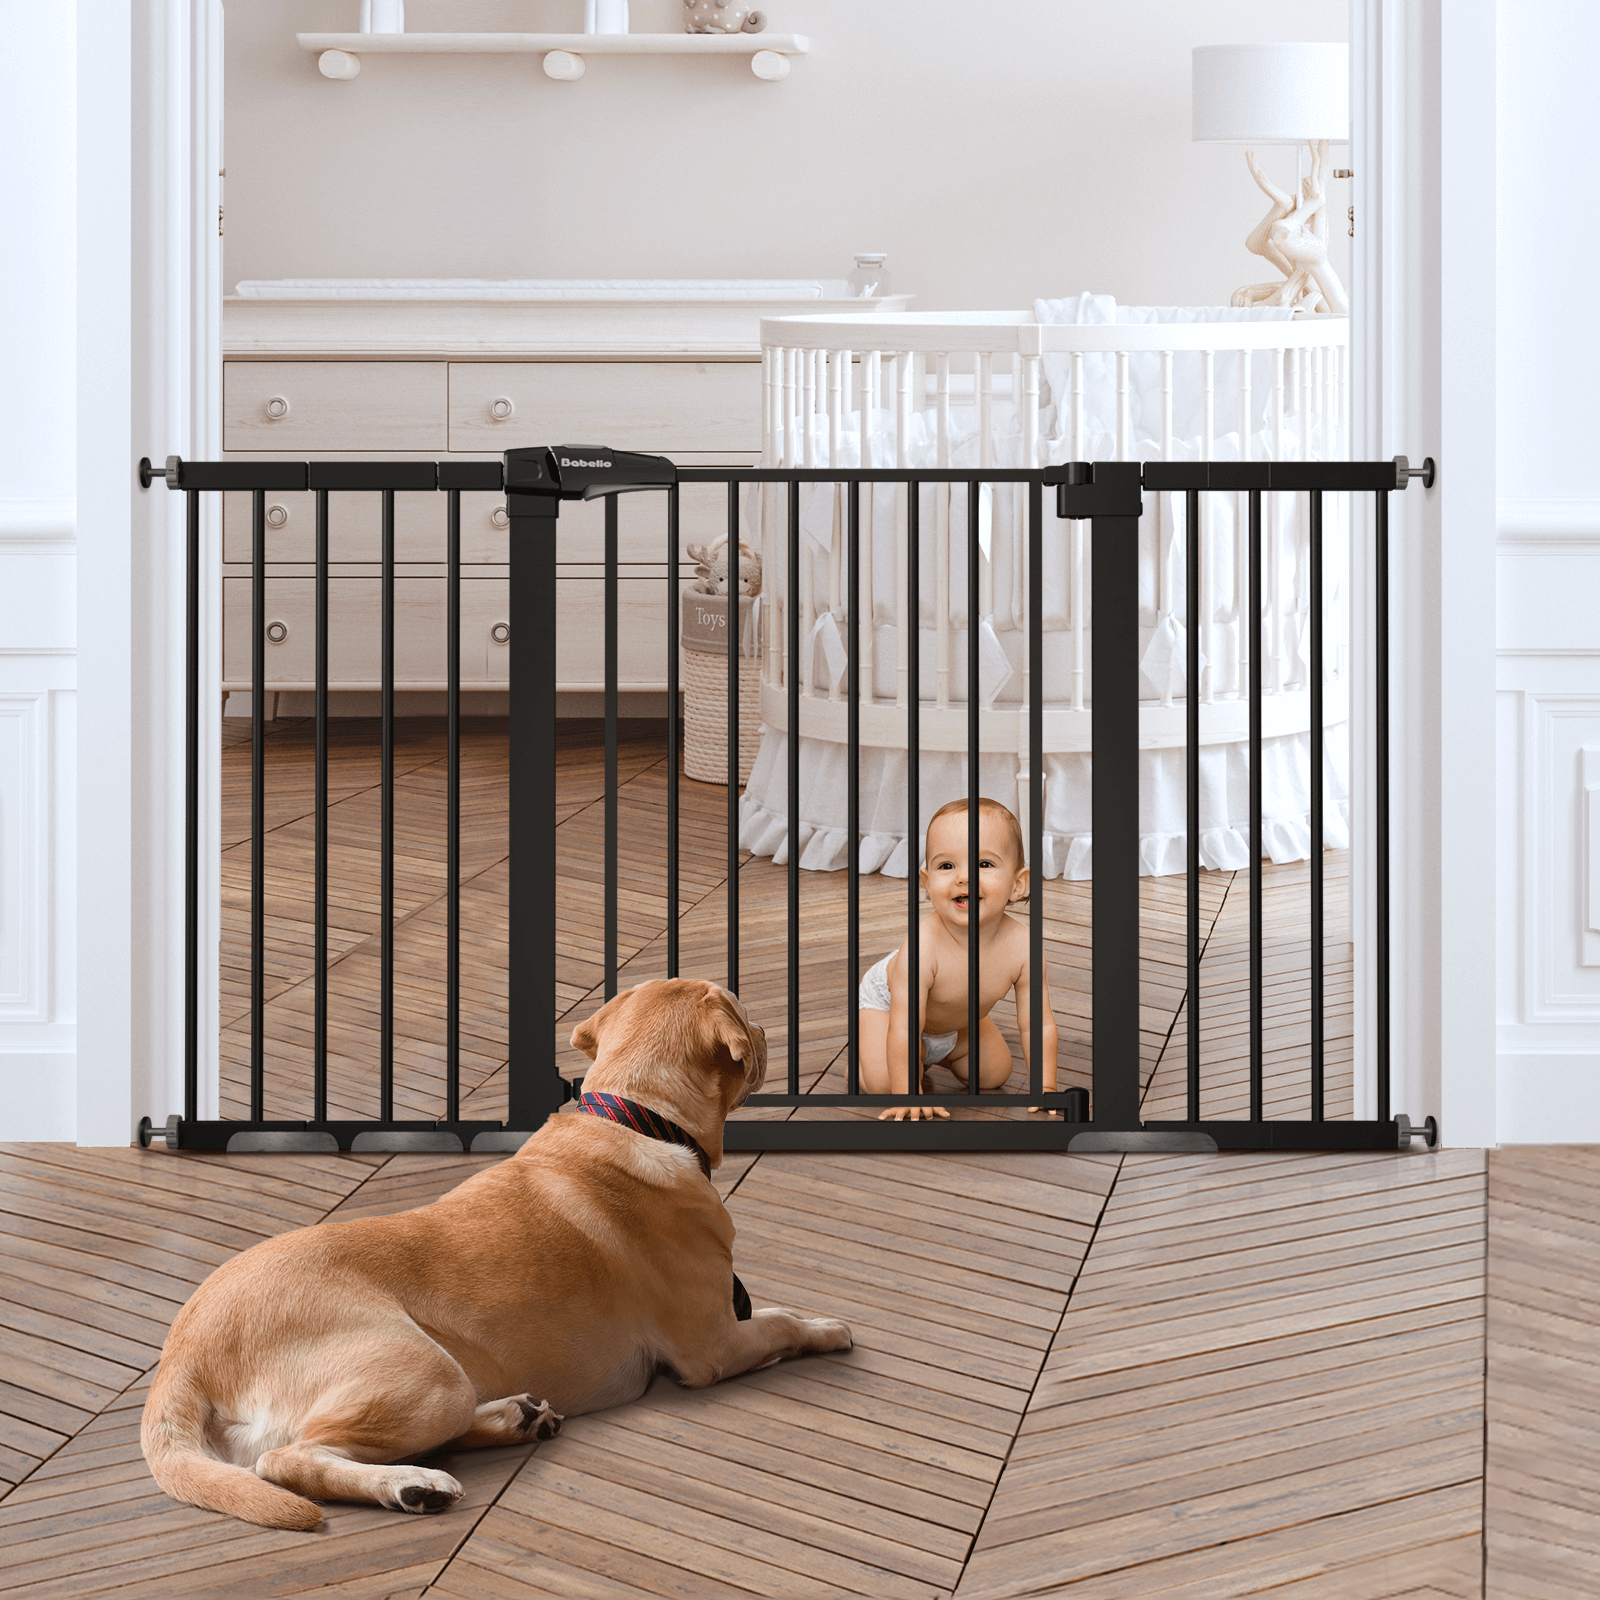 Babelio 29-48" Wide All-Steel Baby Gate – Easy Walk-Through, No-Drill Setup, Auto-Close, for Children and Pets